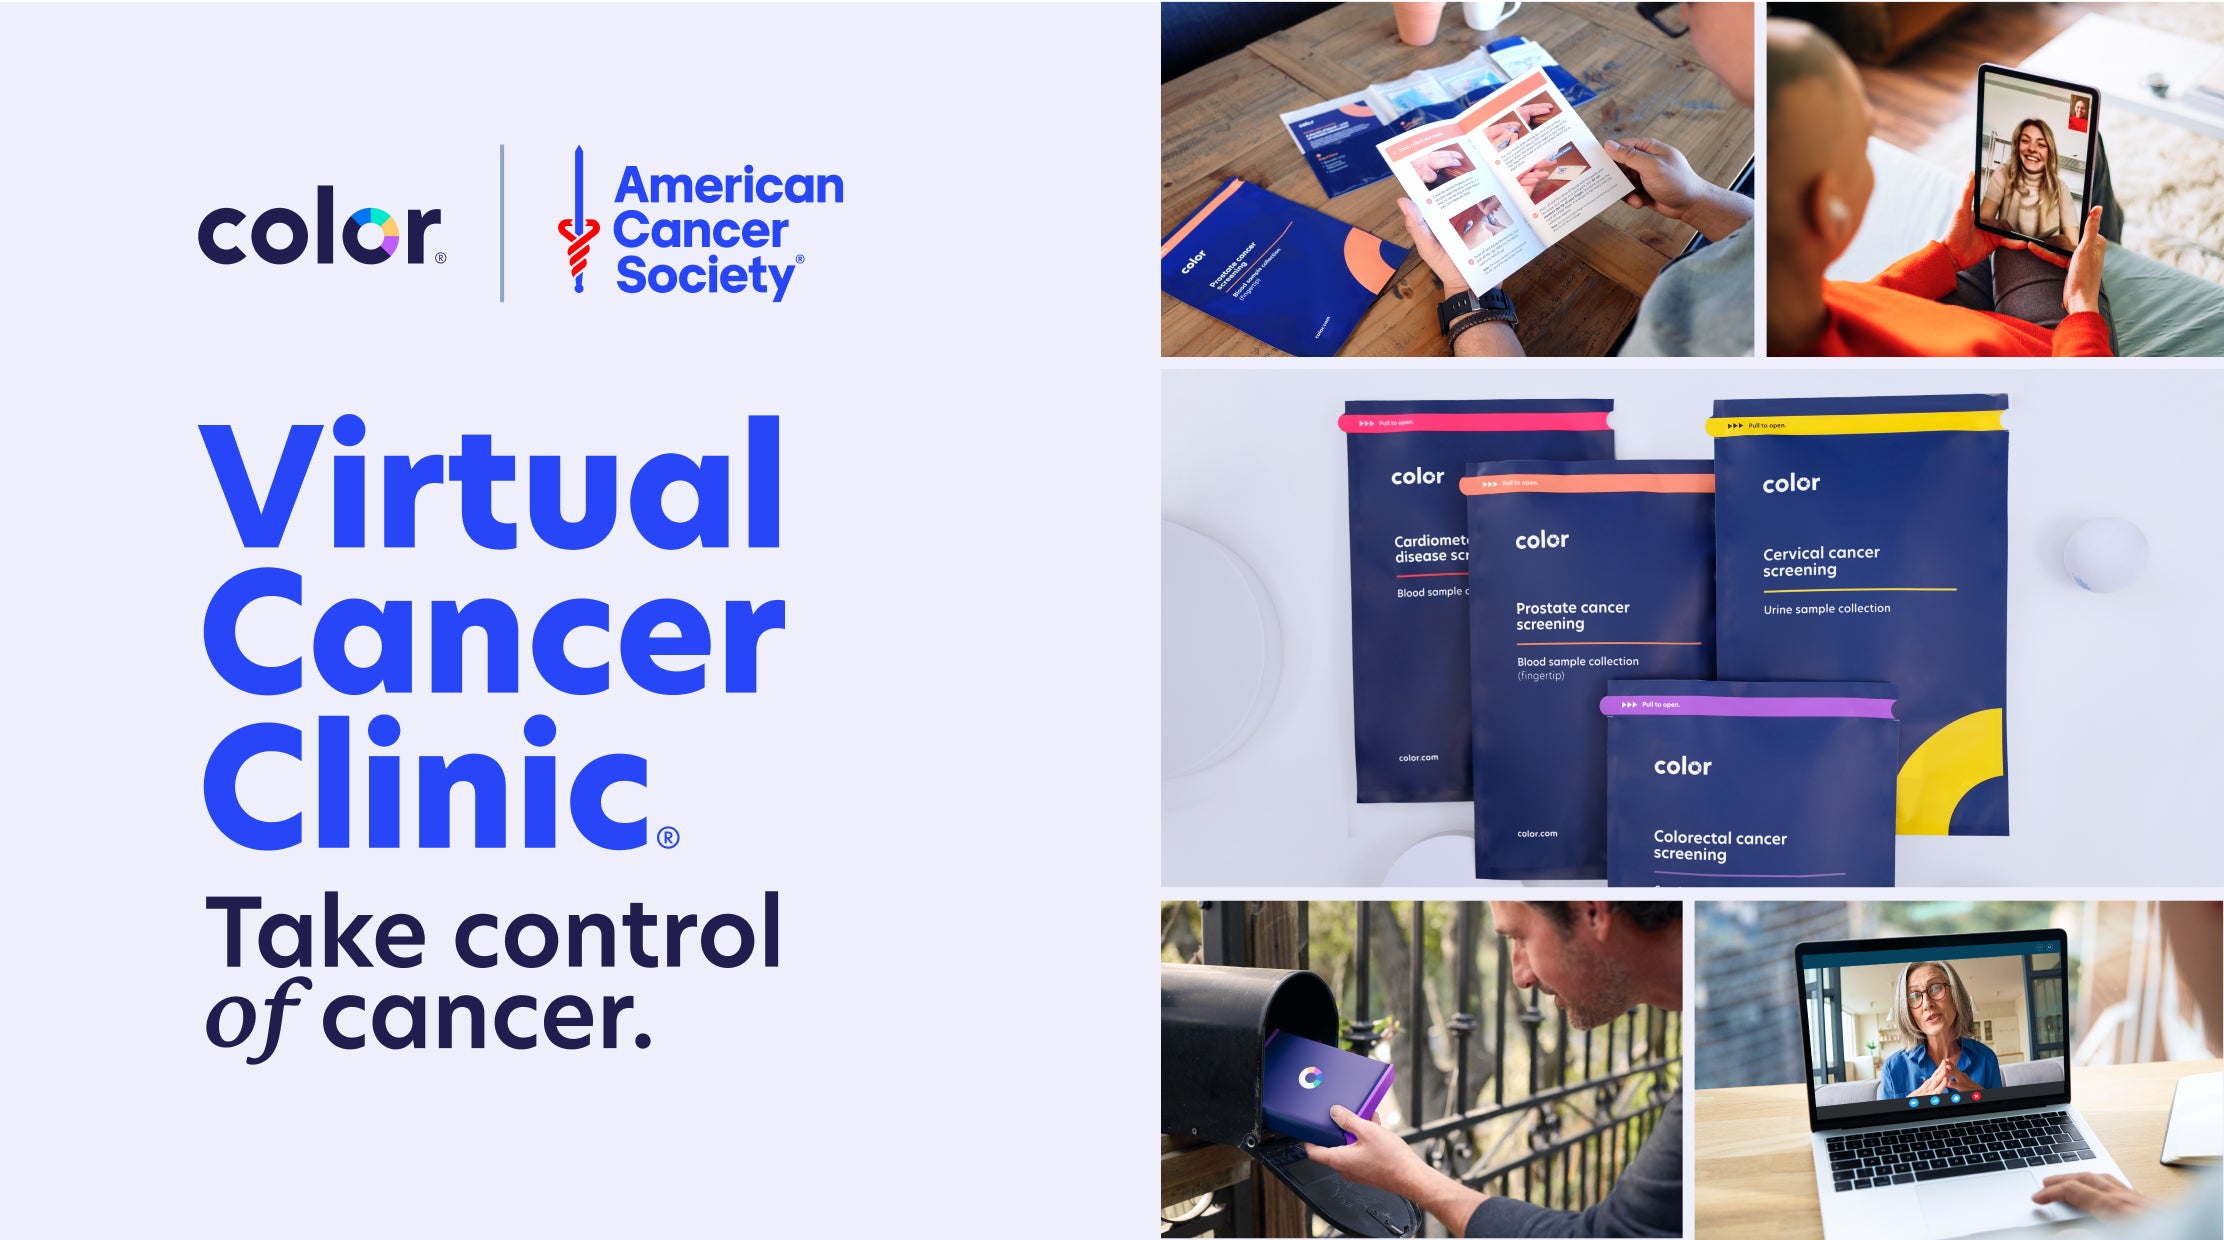 Virtual Cancer Clinic - Take control of cancer